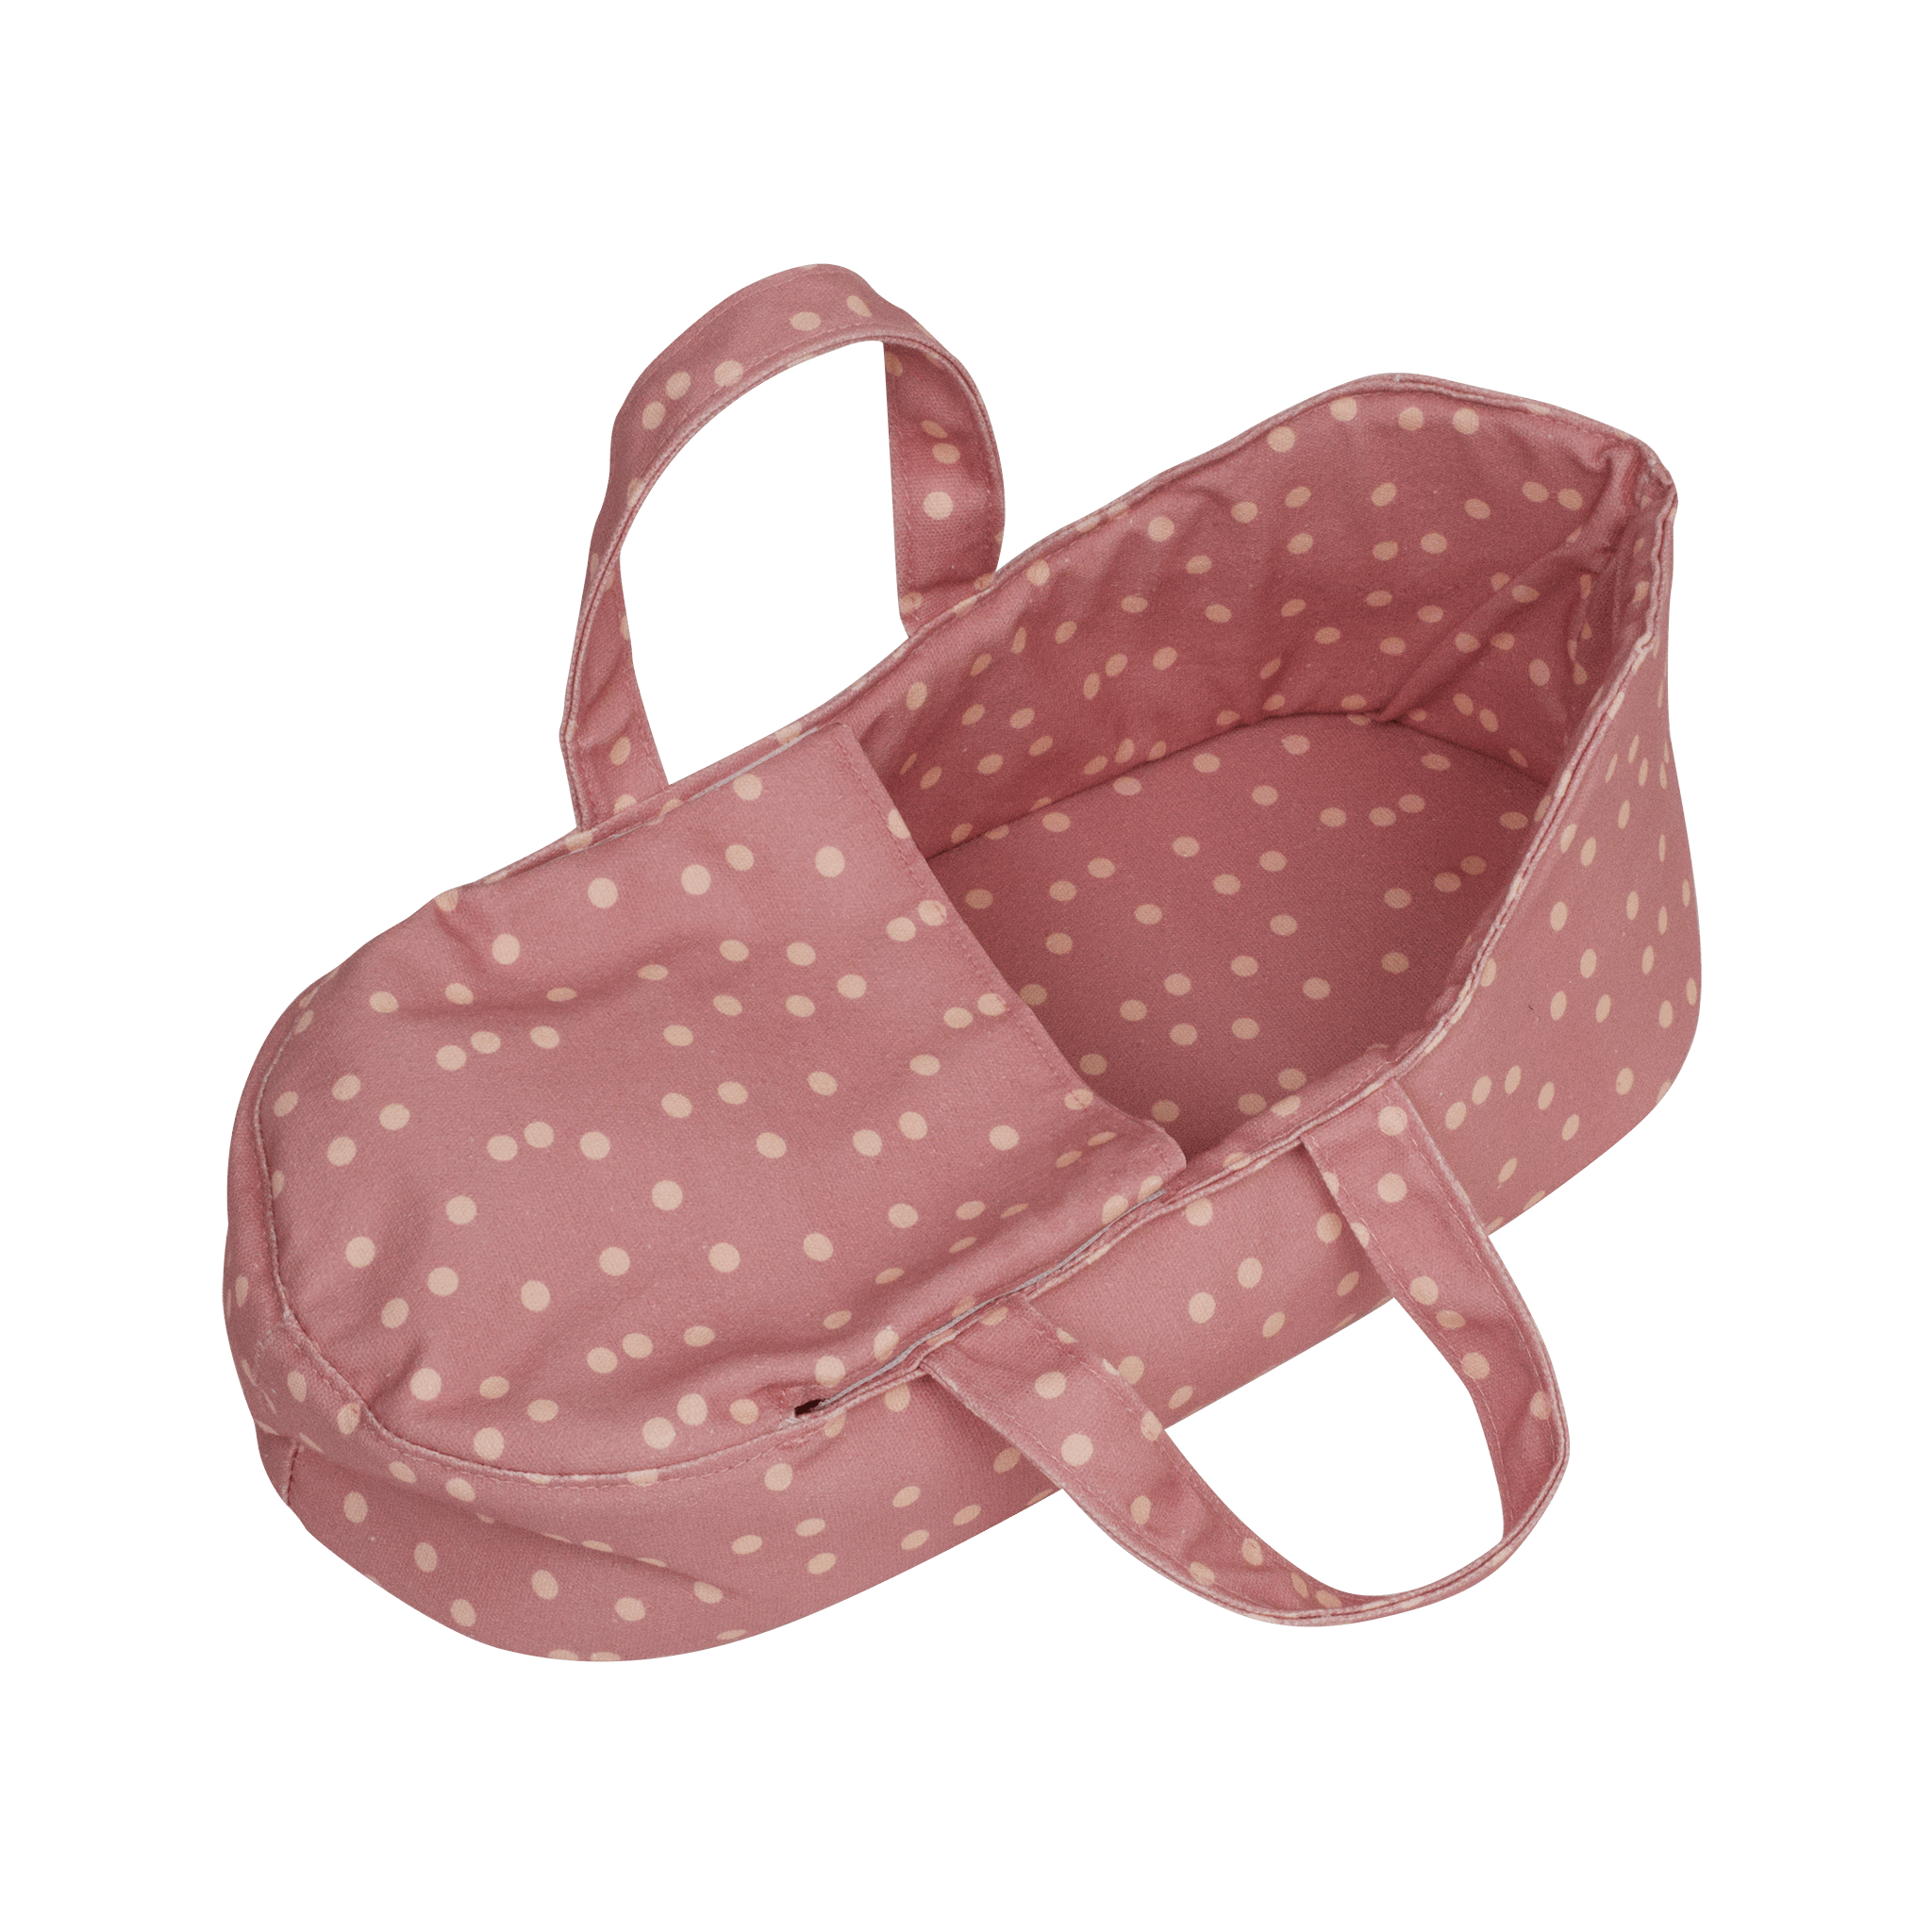 Dinkum Dolls Carry Cot - Polka Dot - Why and Whale